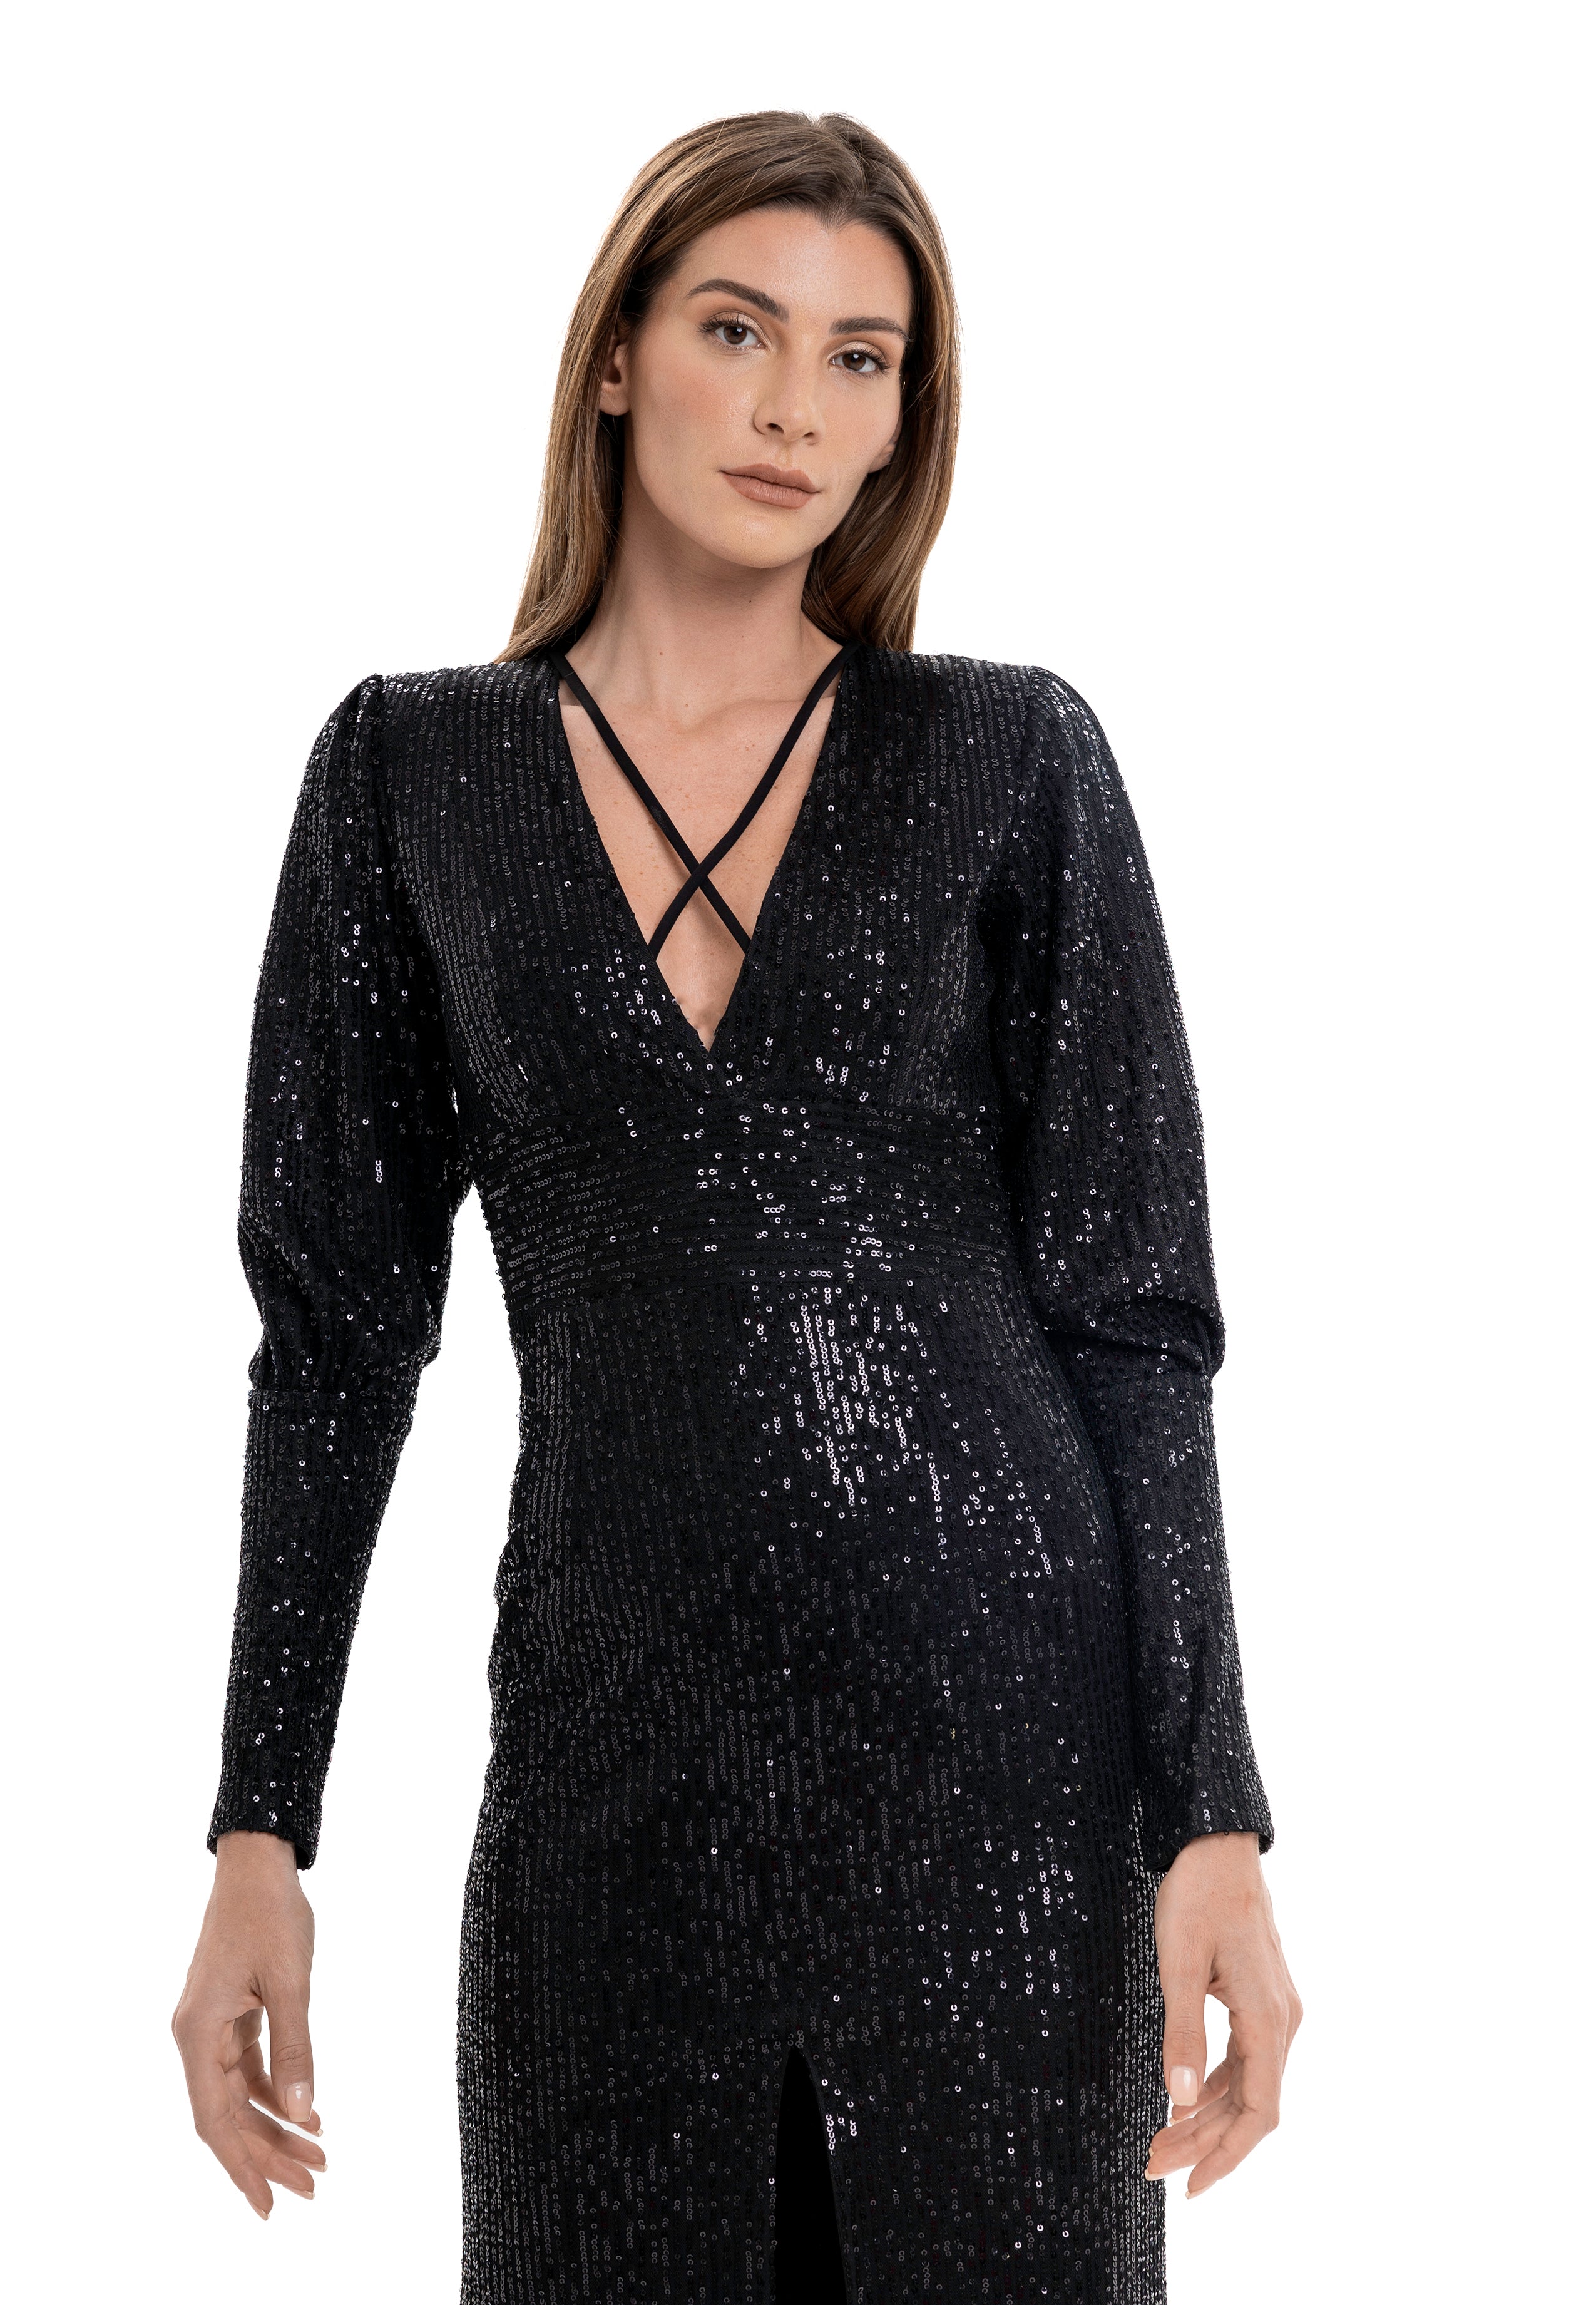 The Glam Long Sequin Dress By Lili Blanc